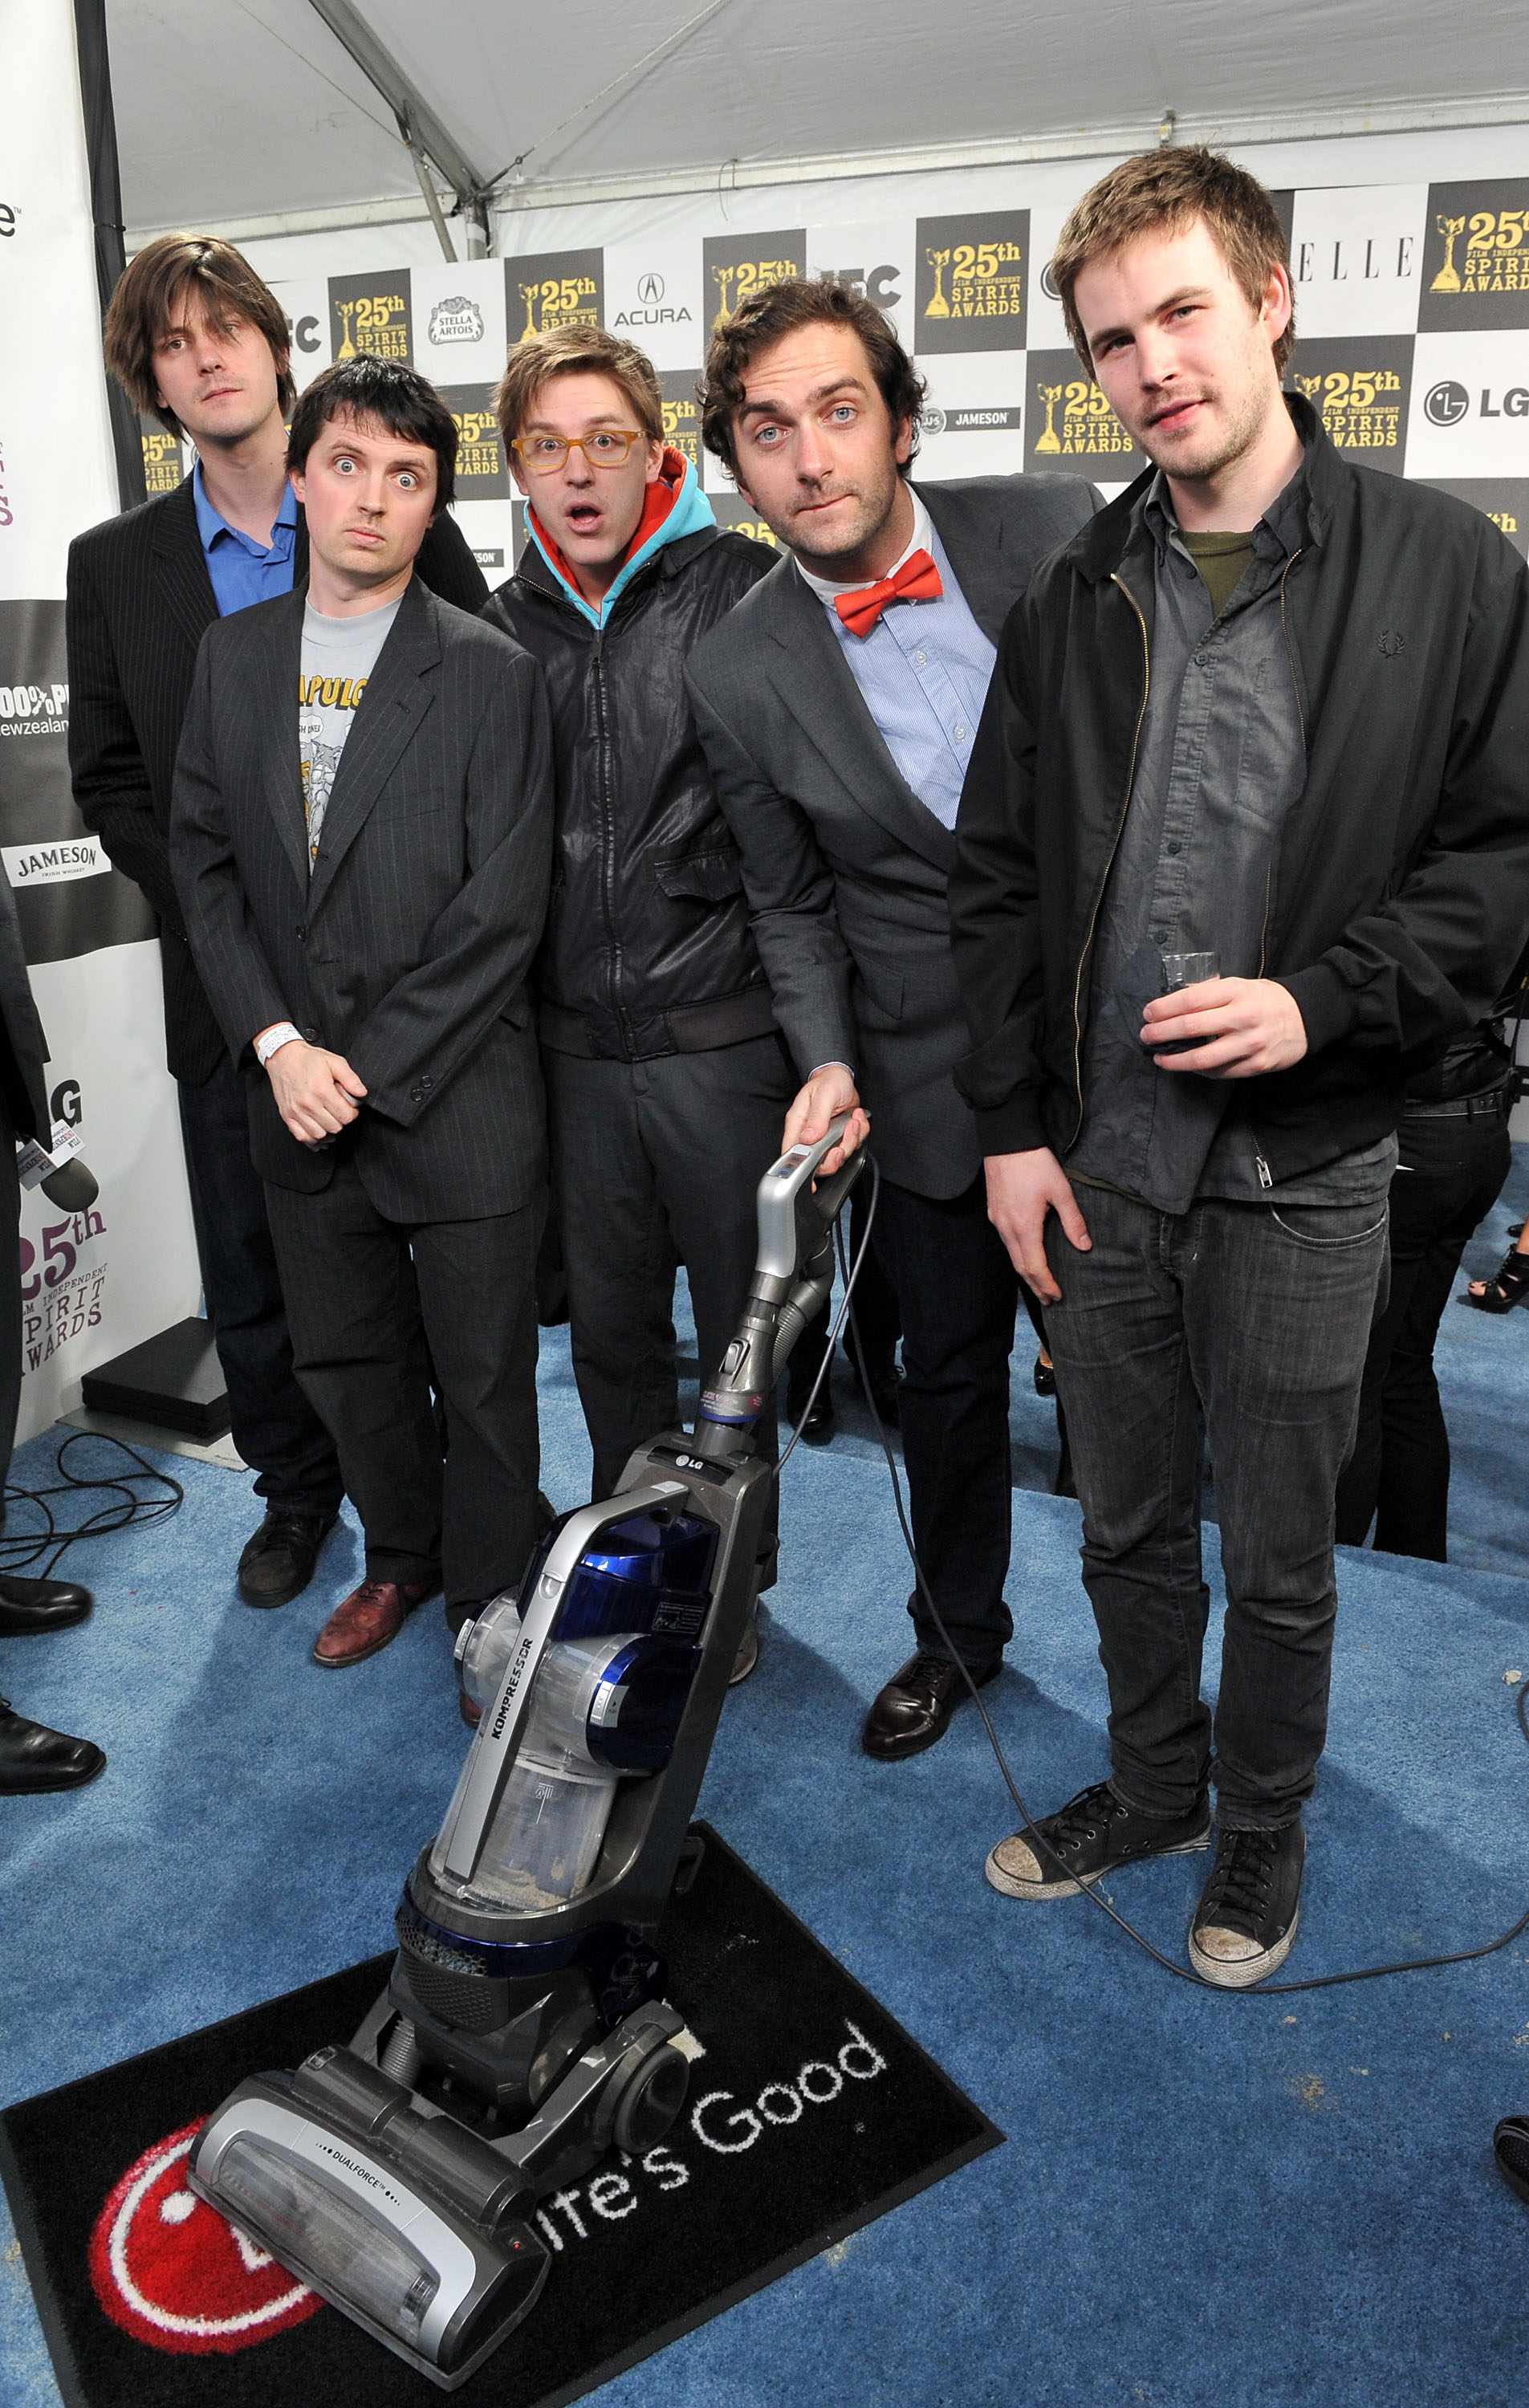 Trevor Moore, Timmy Williams, Darren Trumeter, Sam Brown and Zach Cregger with the LG Electronics Kompressor Vacuum on 25th Spirit Awards Blue Carpet held at Nokia Theatre L.A. Live on March 5, 2010 in LA